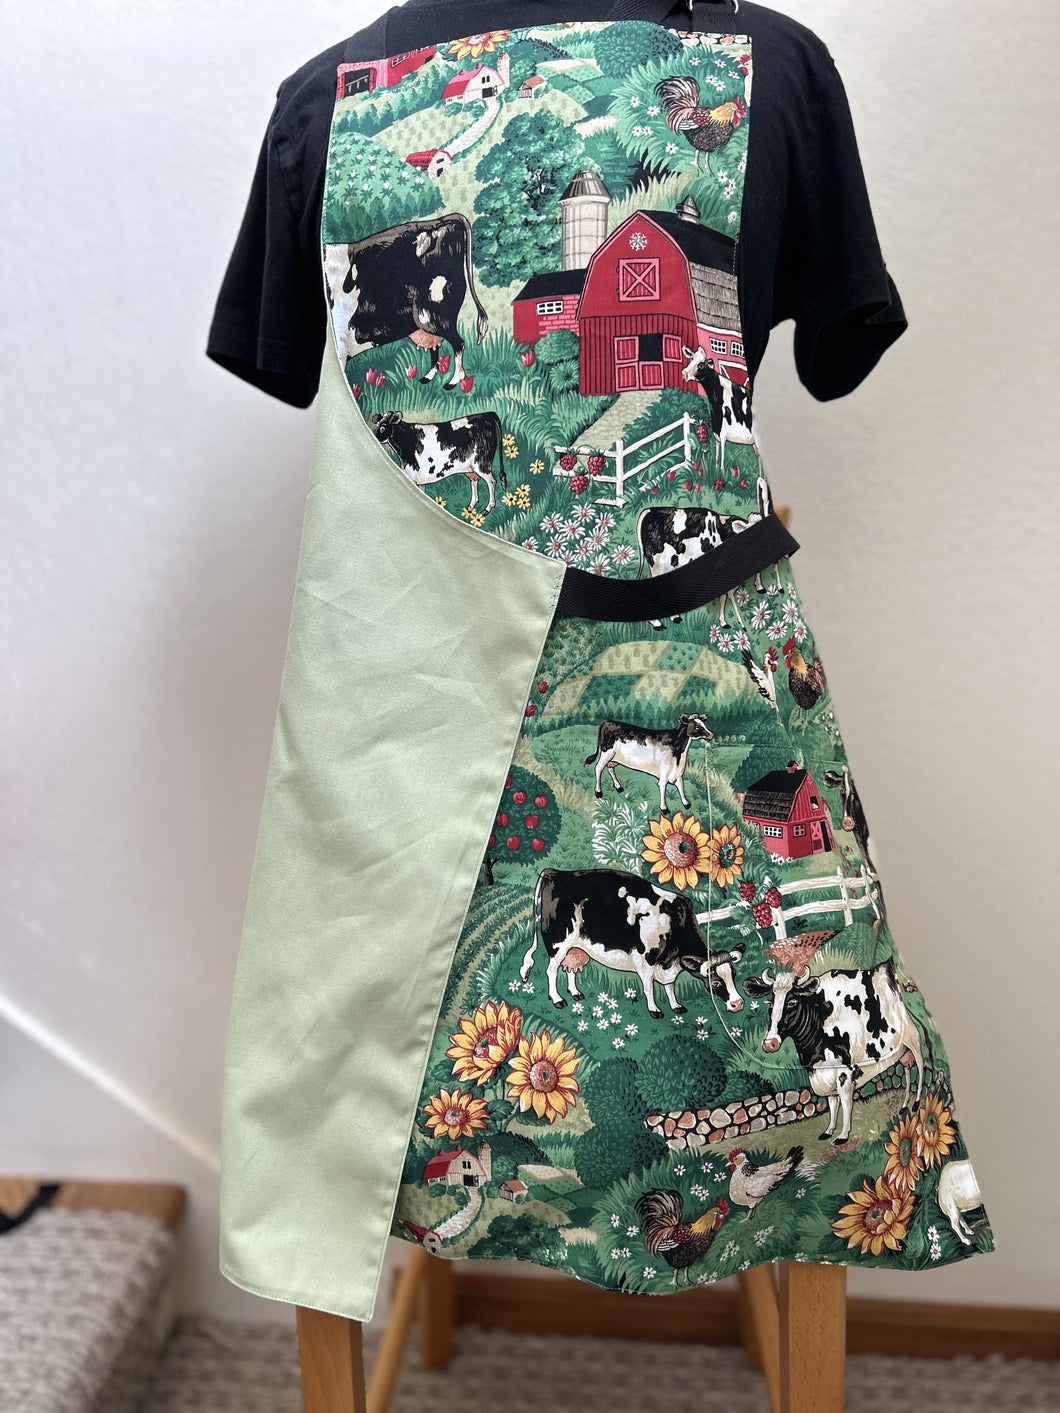 Farm Animals, Sunflowers, and Red Barns - Adult Aprons